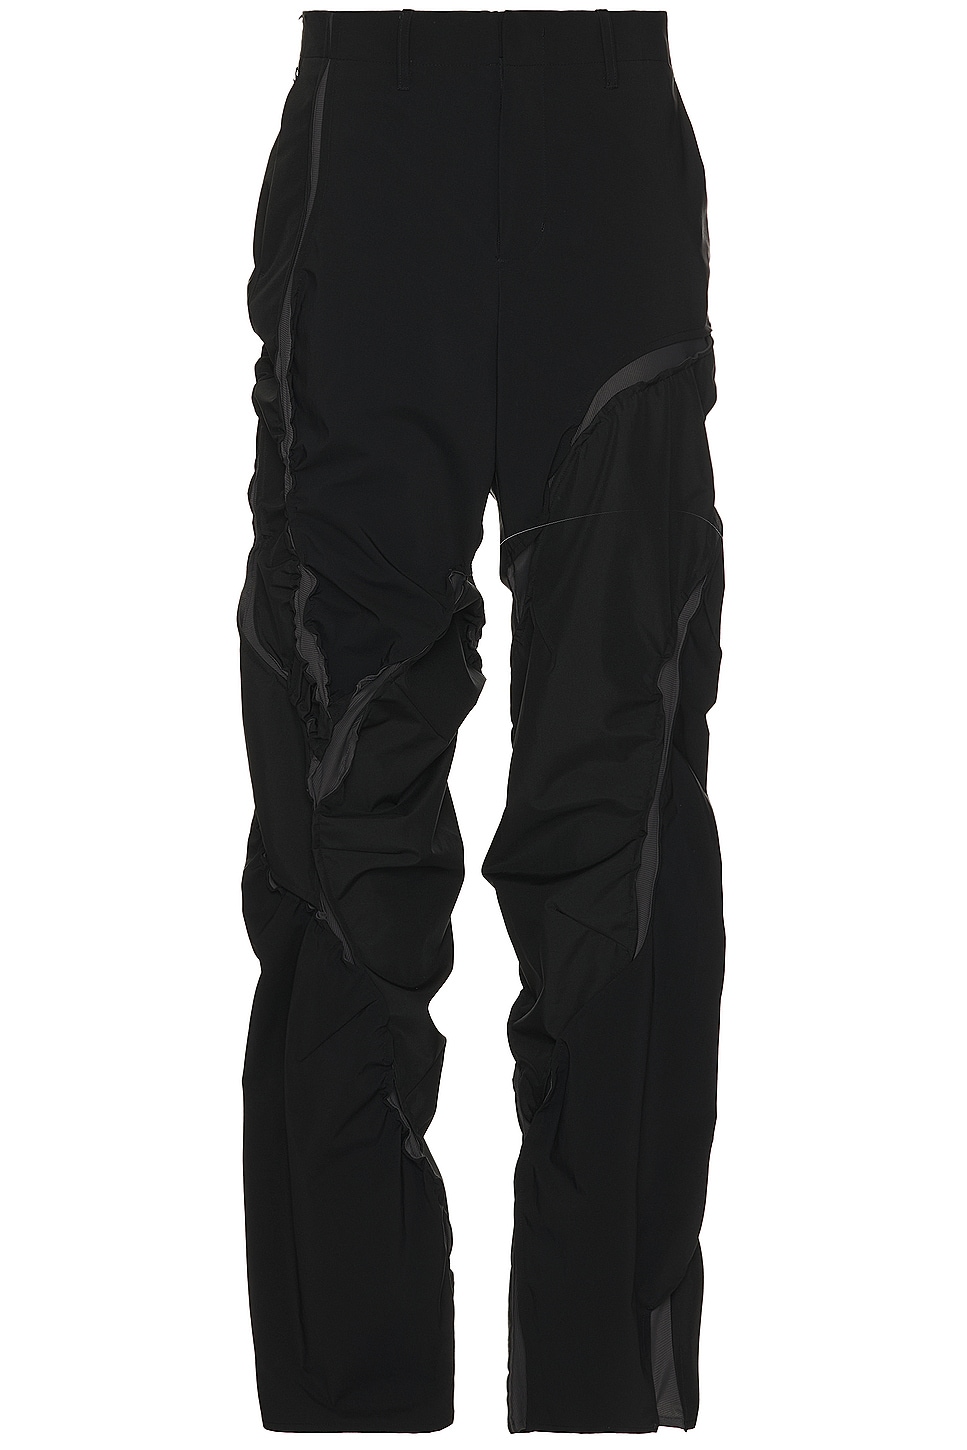 Image 1 of POST ARCHIVE FACTION (PAF) 6.0 Technical Pants in Black